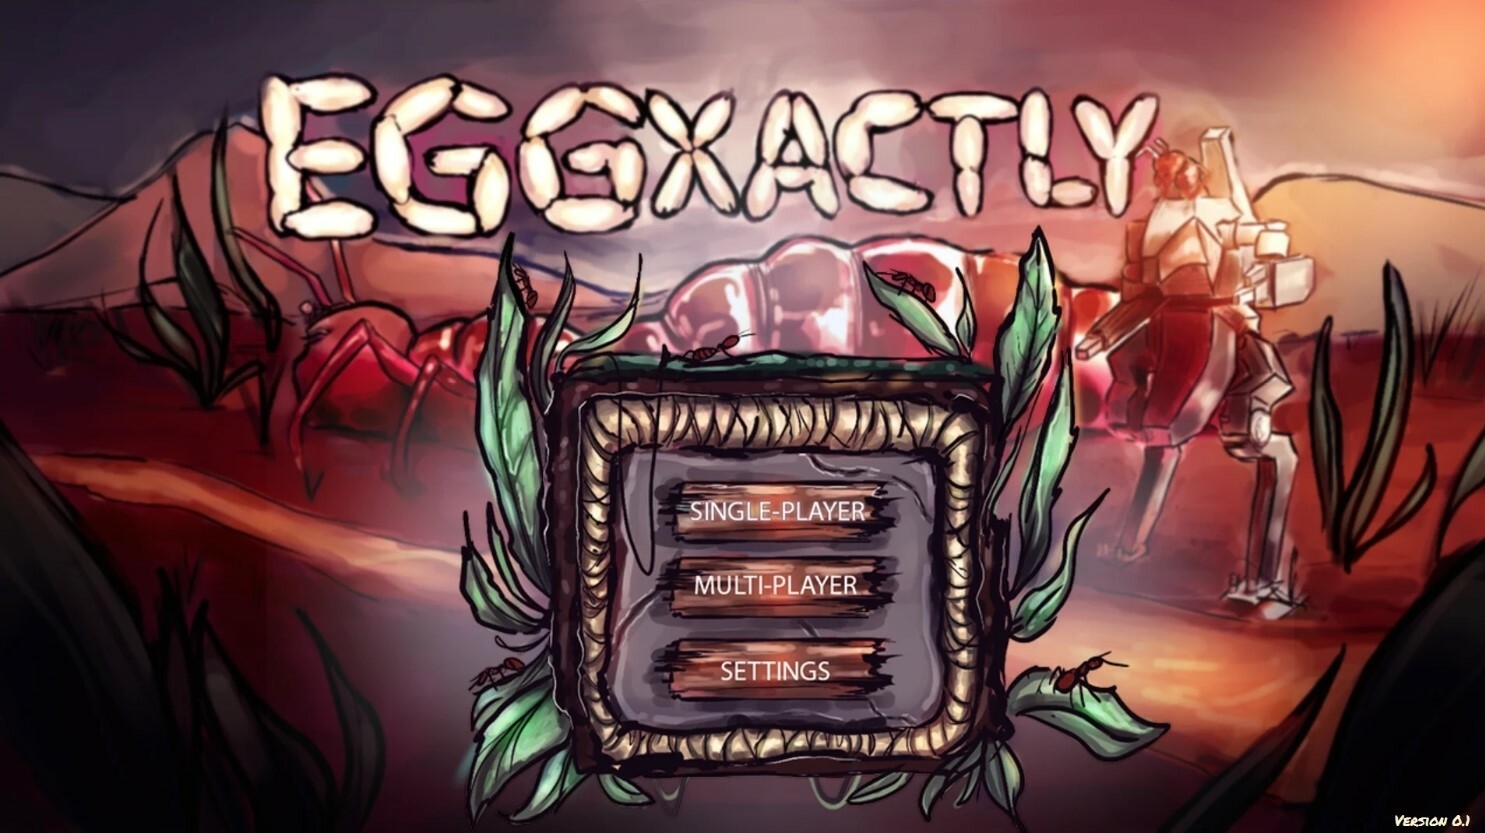 Eggxactly - Game Pitch